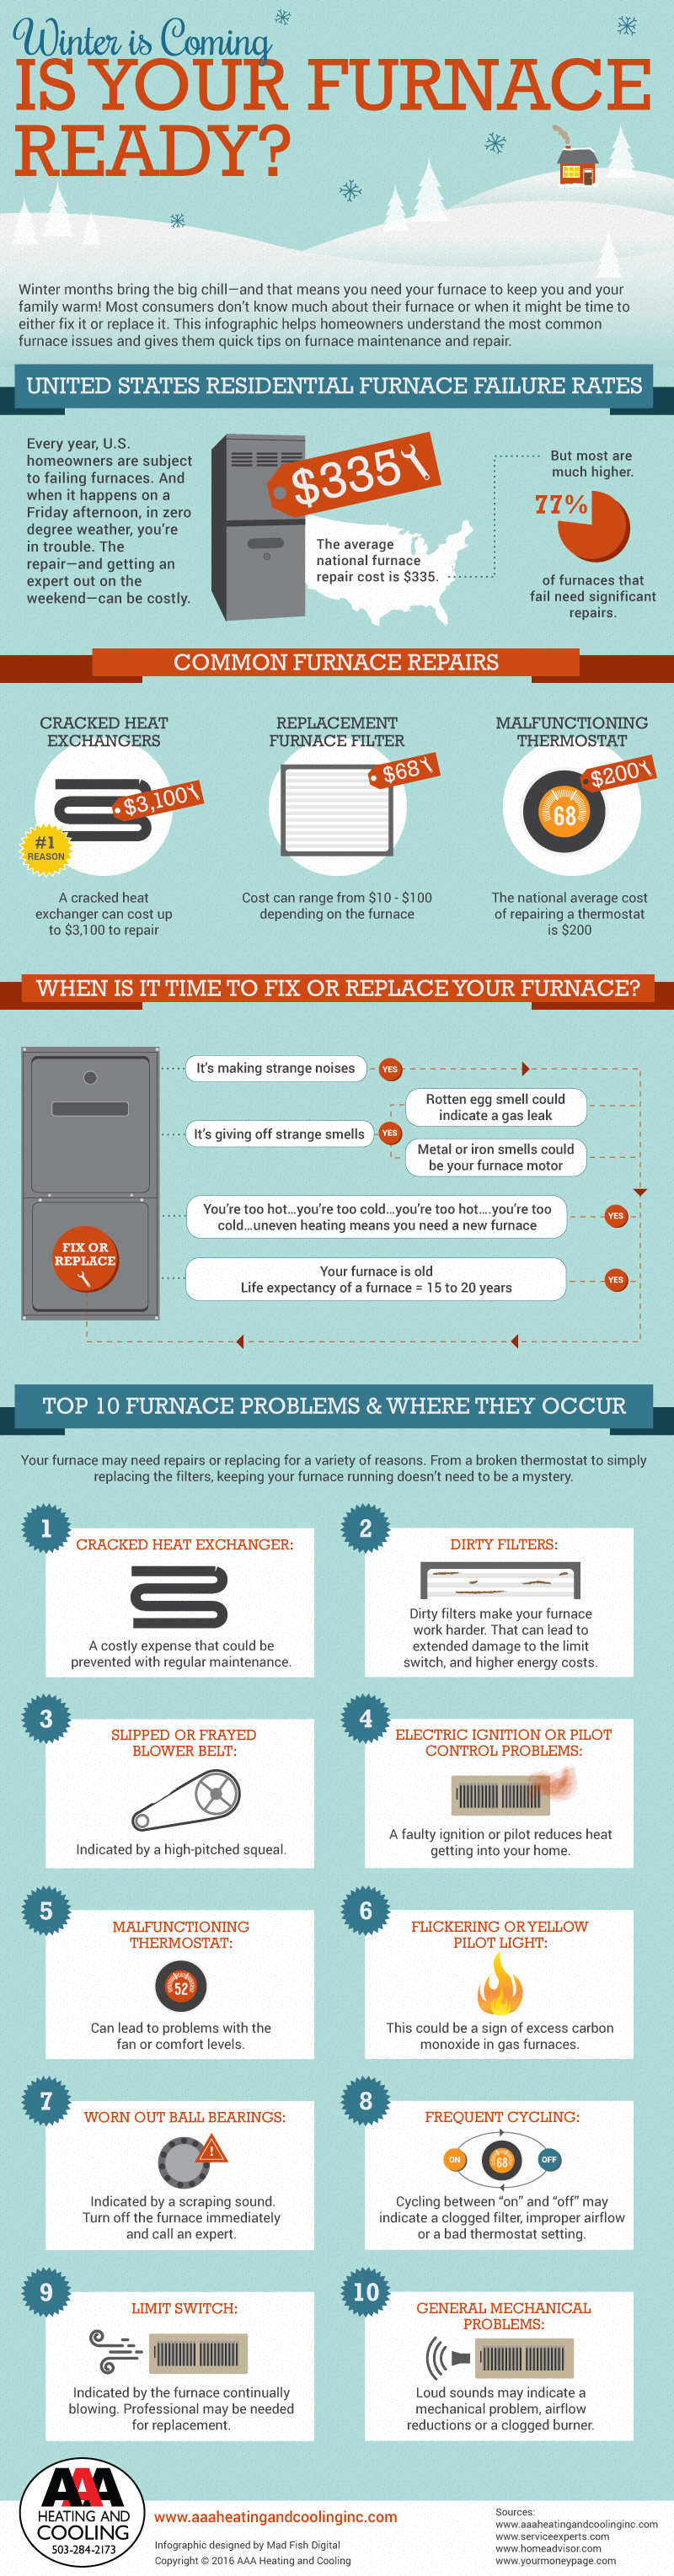 Infographic detailing furnace failure rates in the US and how homeowners can identify problem areas. 